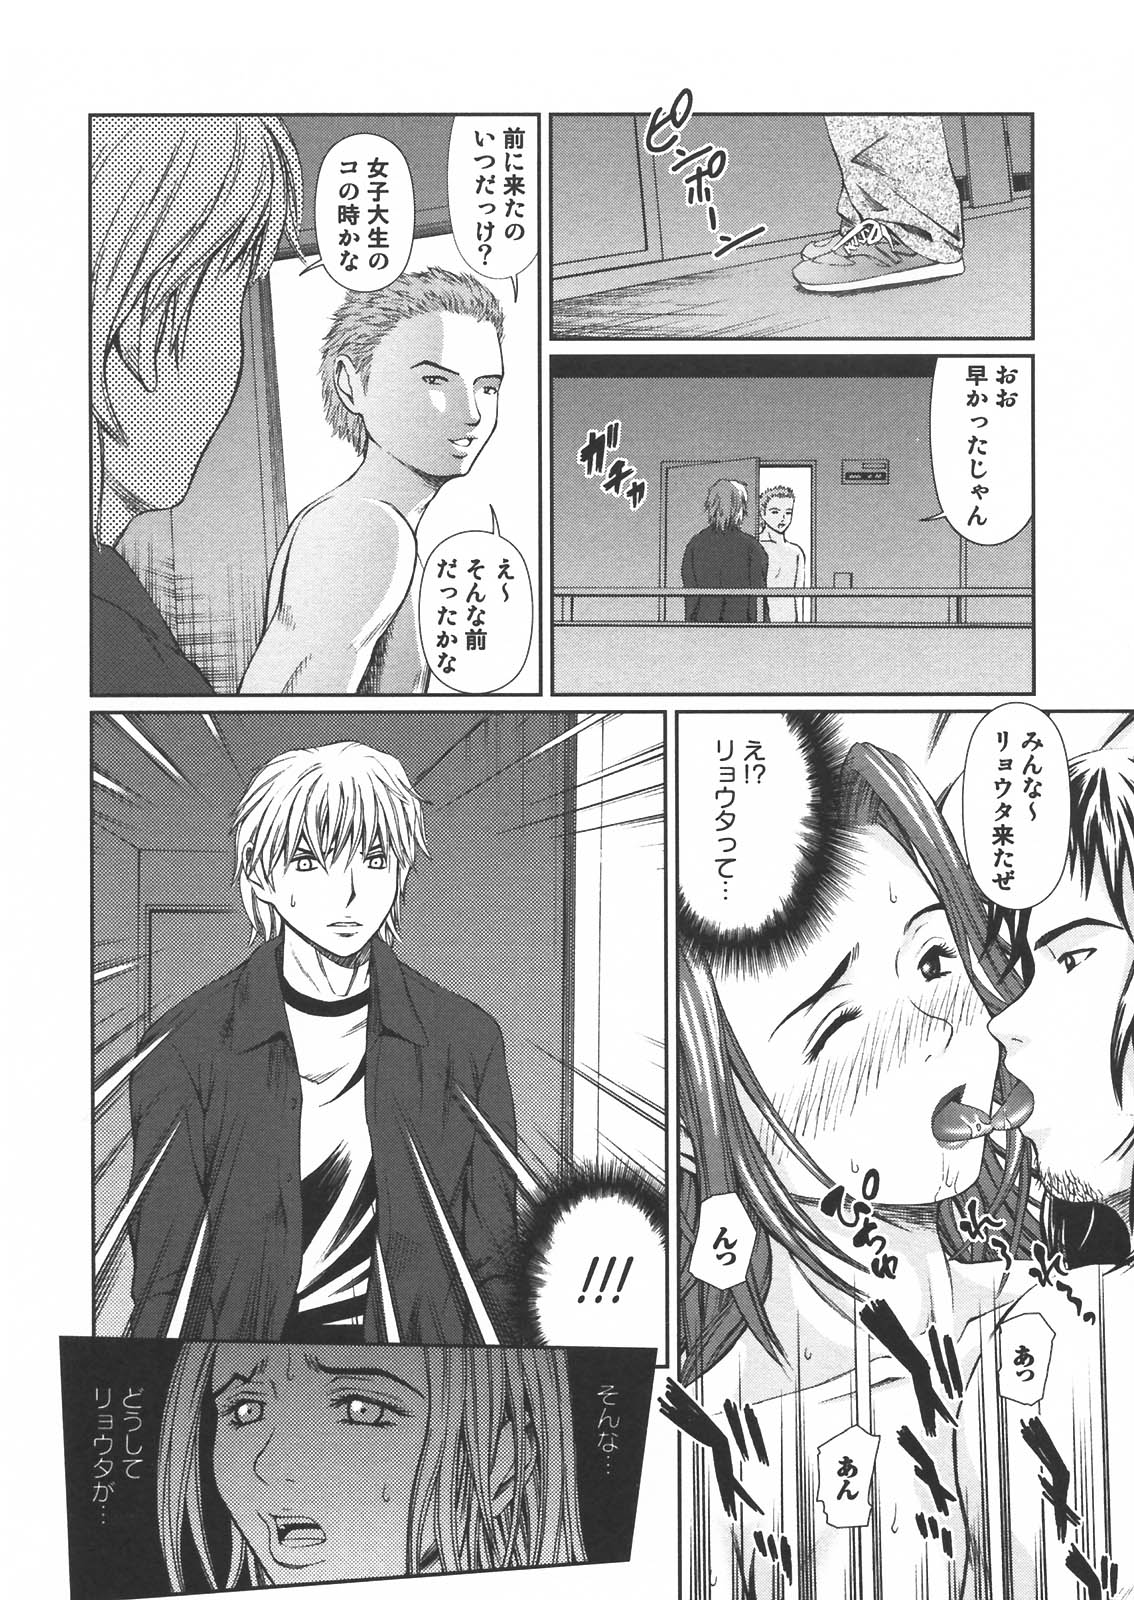 [Anthology] Haha to Ko no Inya - Mother's and son's indecent night - page 44 full